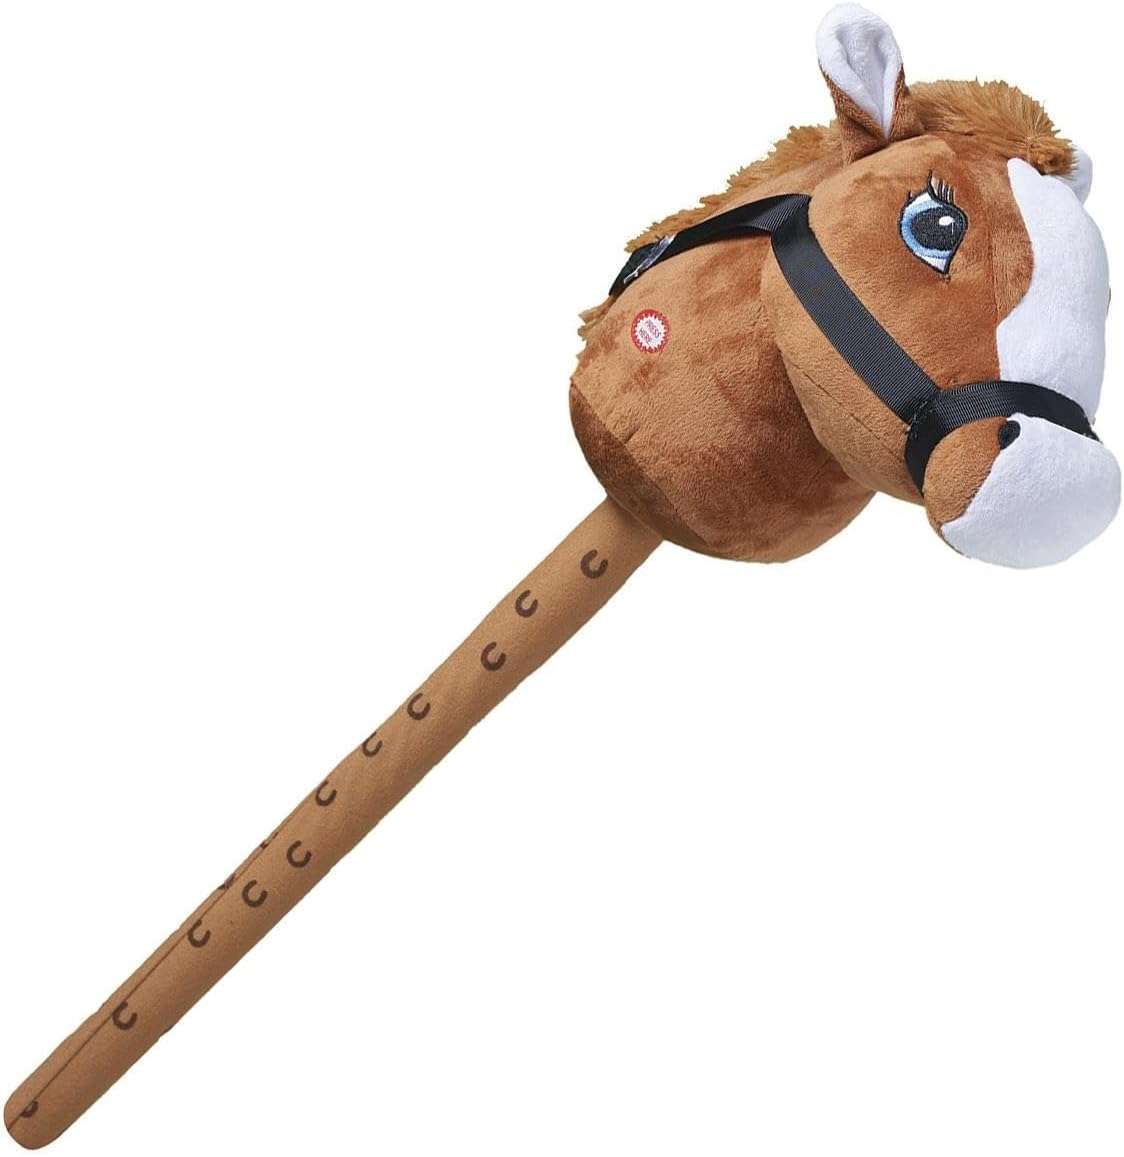 Hobby Horse competition to get underway. Image of a hobby horse